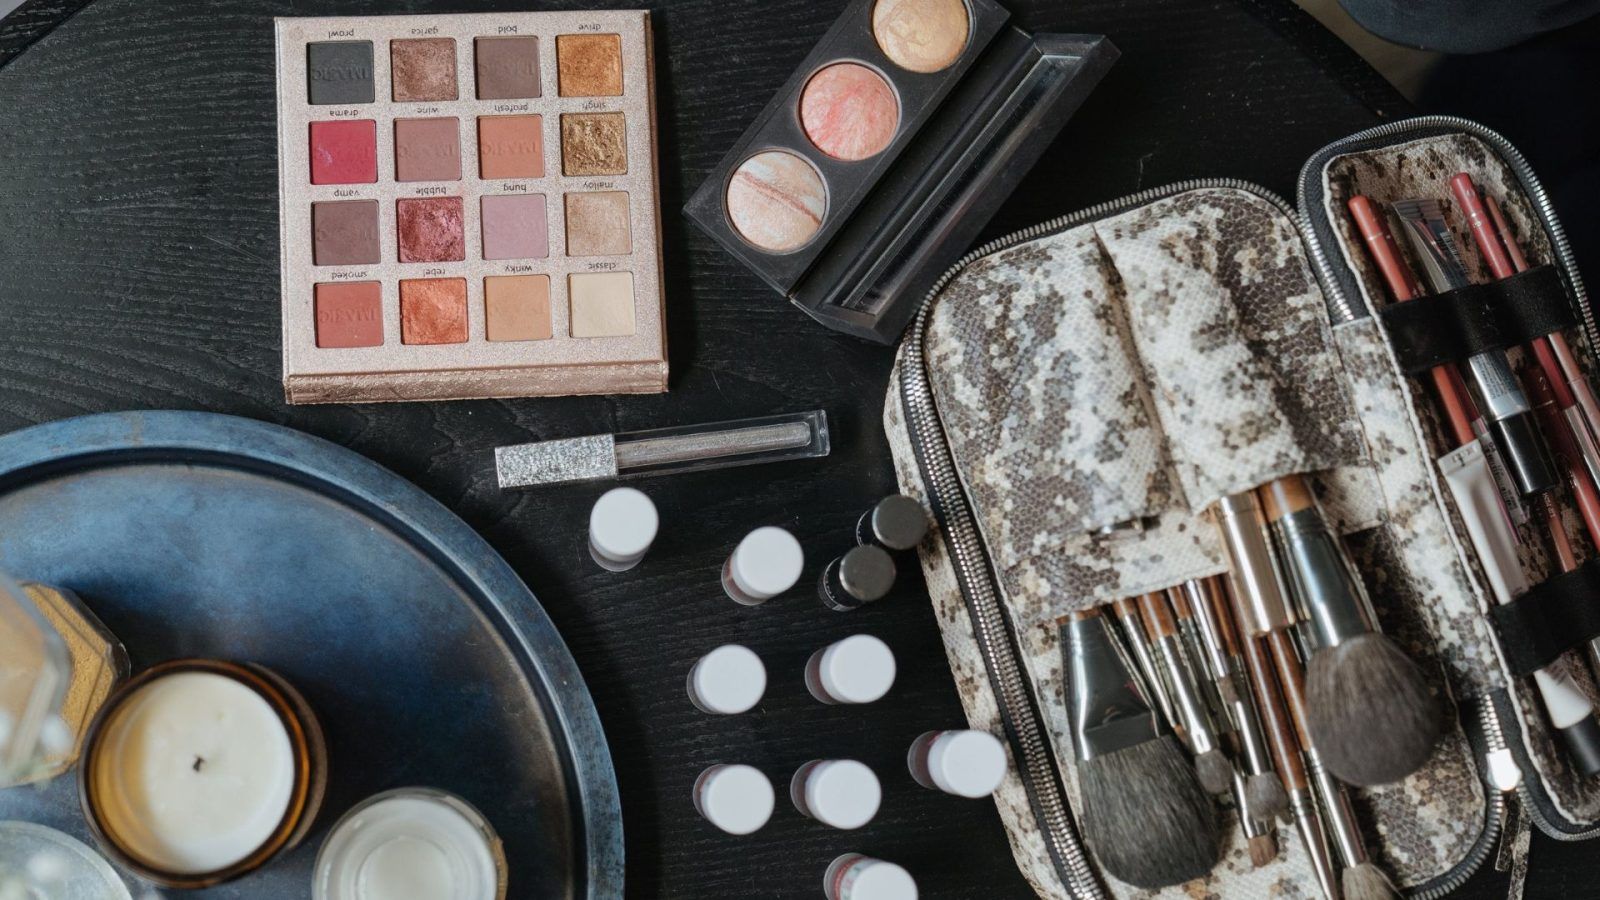 The best festive makeup kits to get ready at home